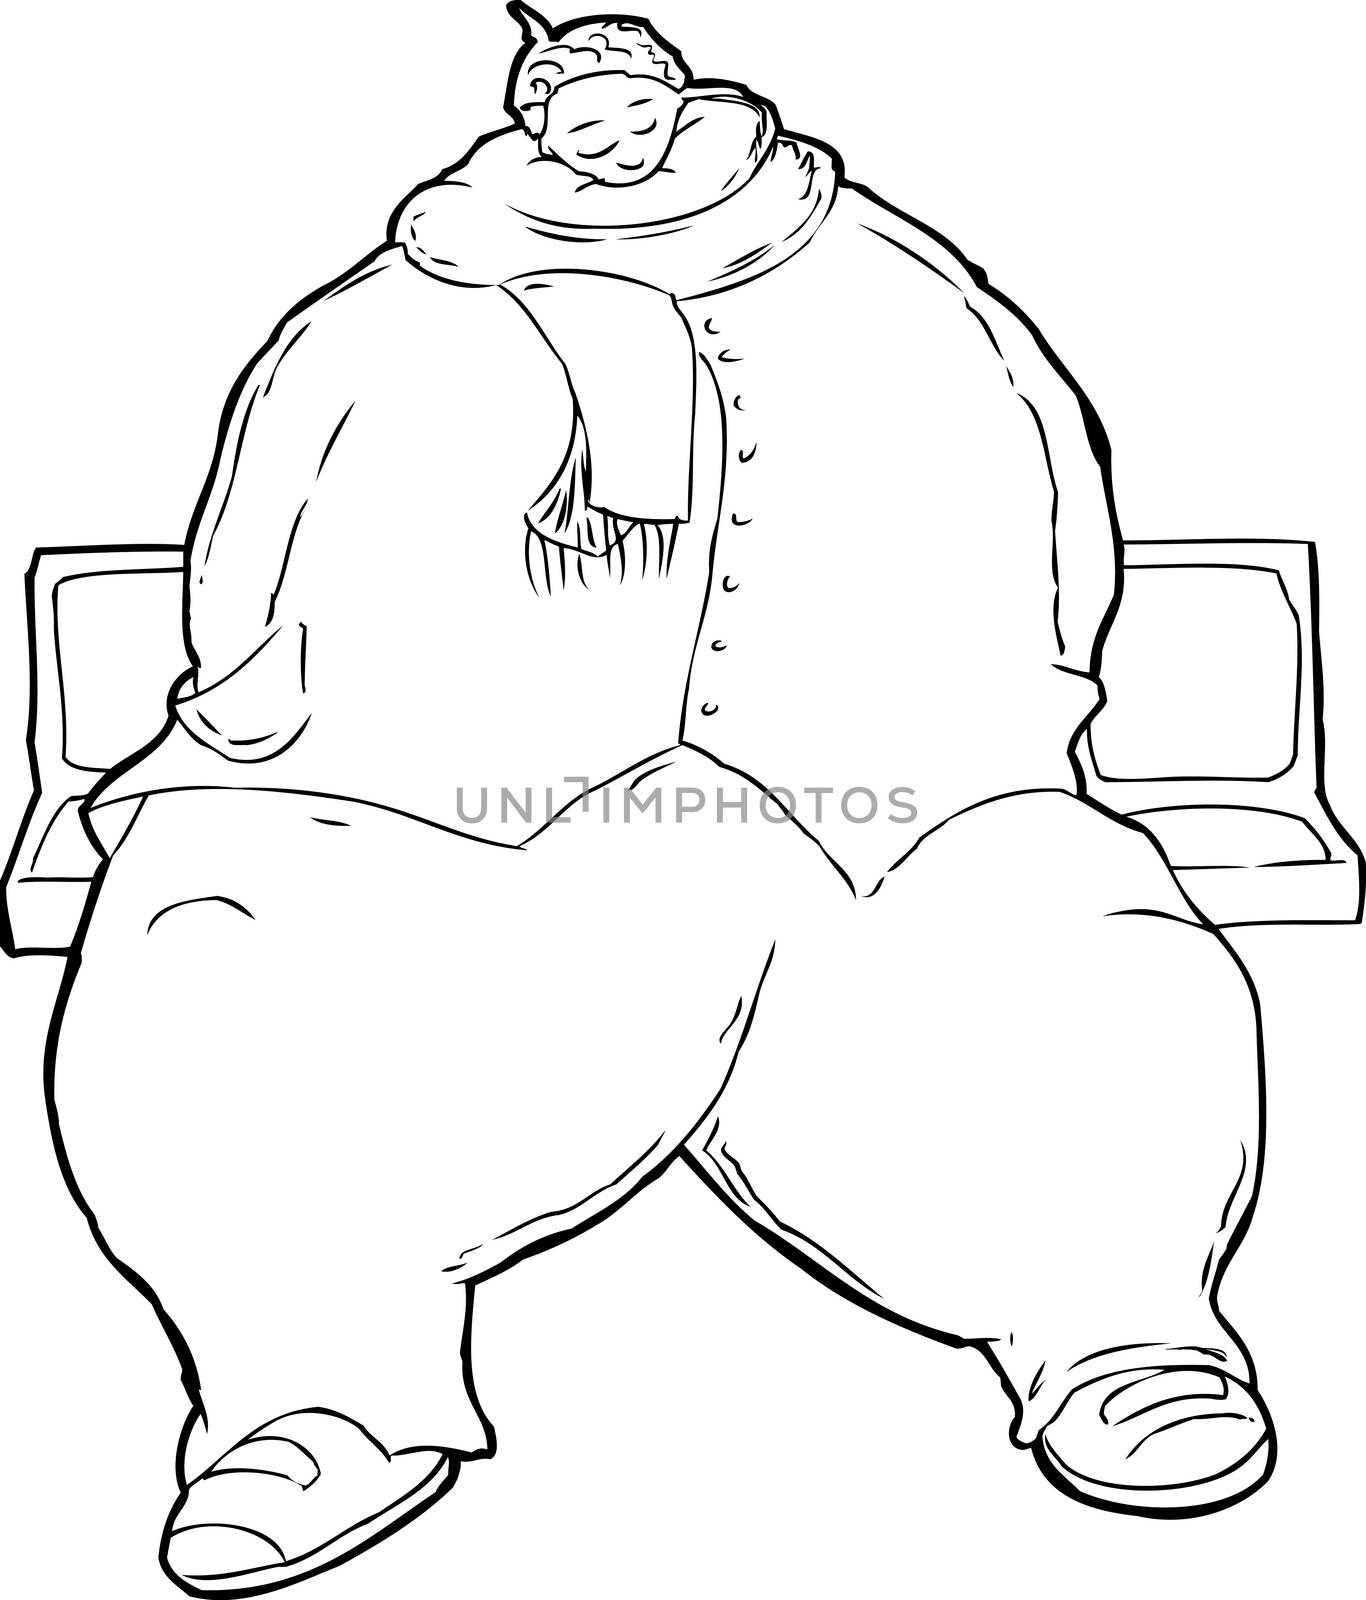 Cartoon caricature of overweight asleep in seats by TheBlackRhino